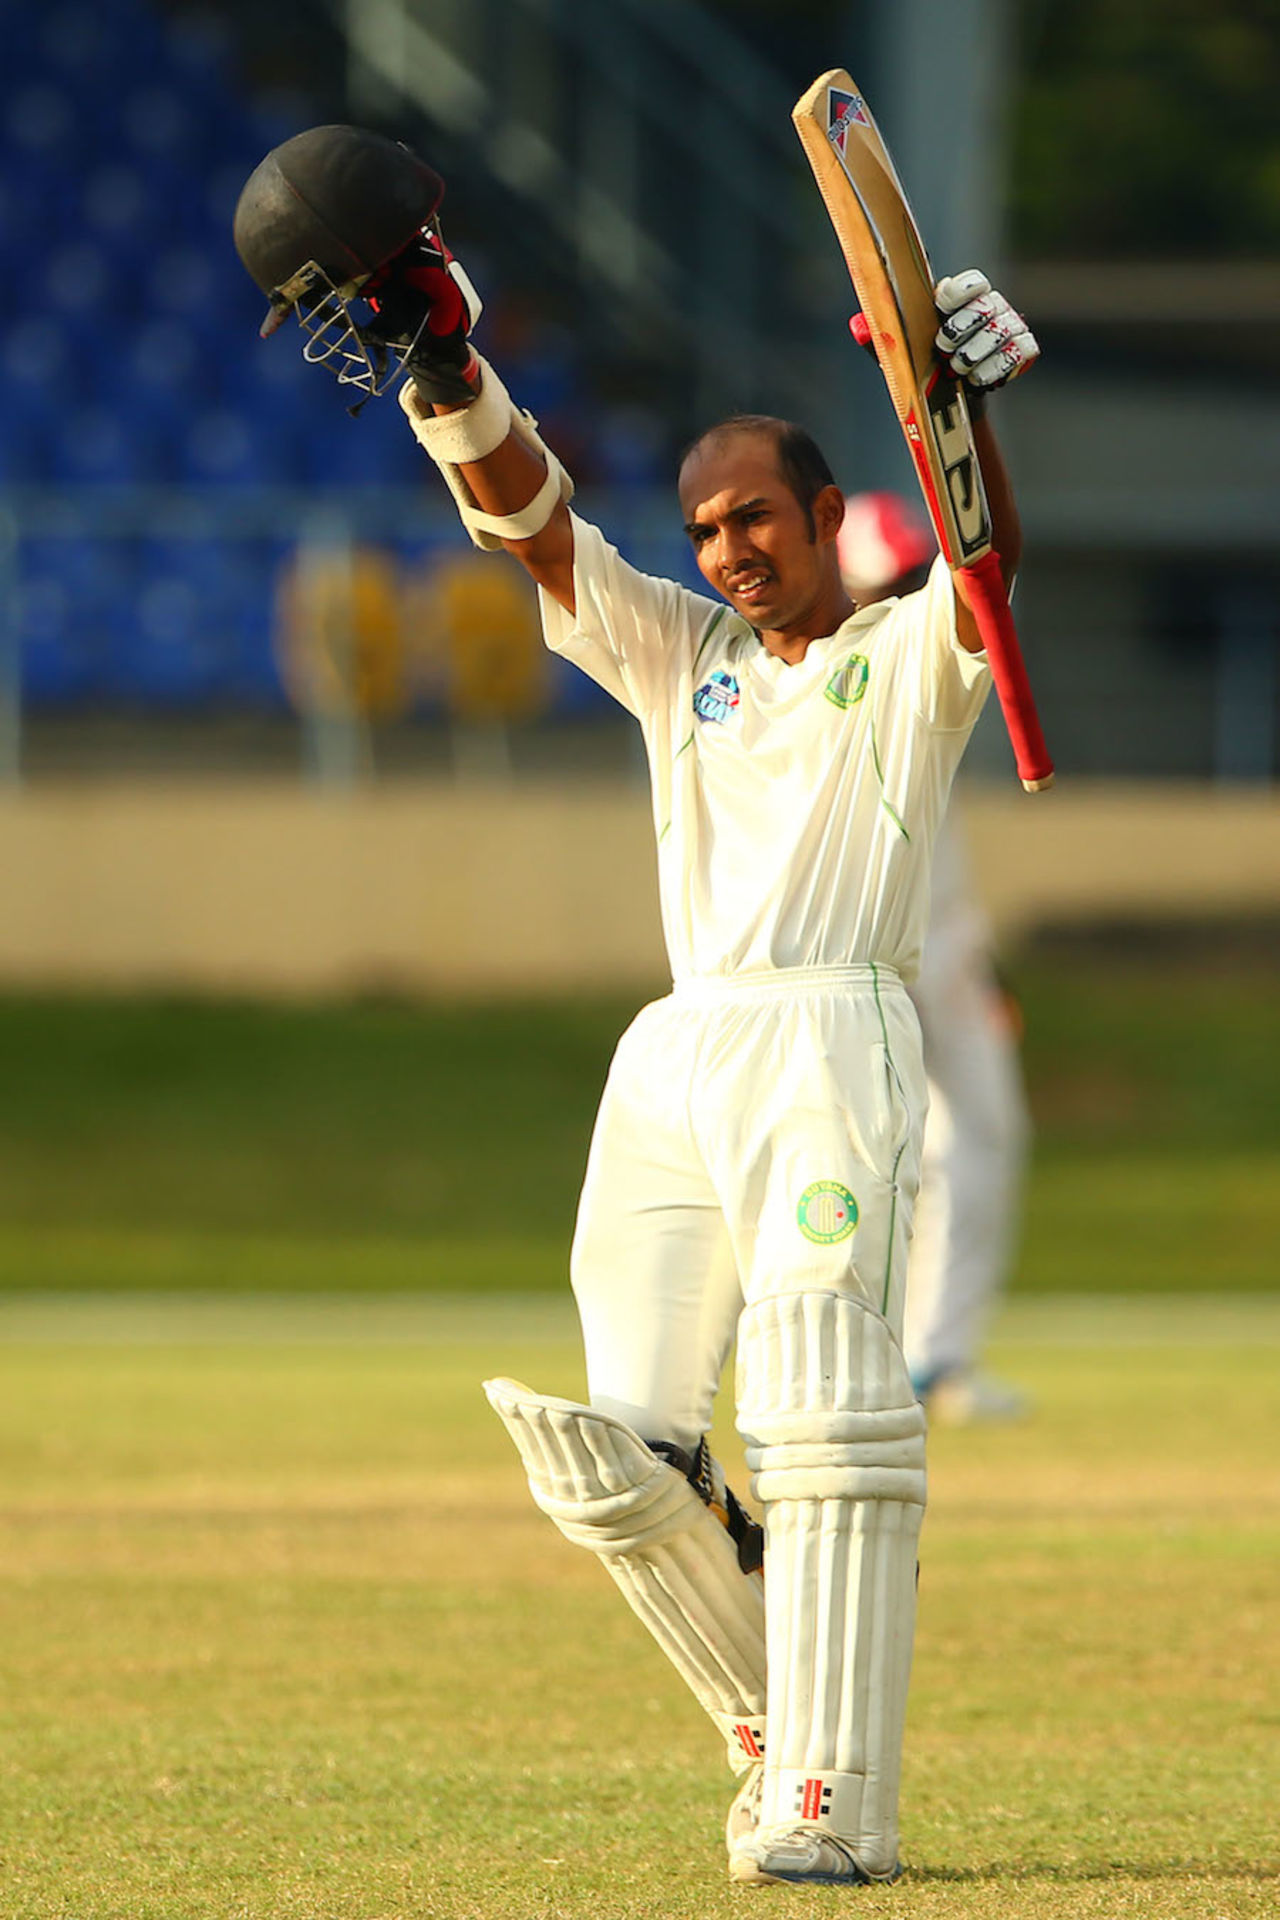 Vishaul Singh celebrates his maiden first-class hundred, Trinidad & Tobago v Guyana, WI Professional League, 2nd day, Port of Spain, December 6, 2014